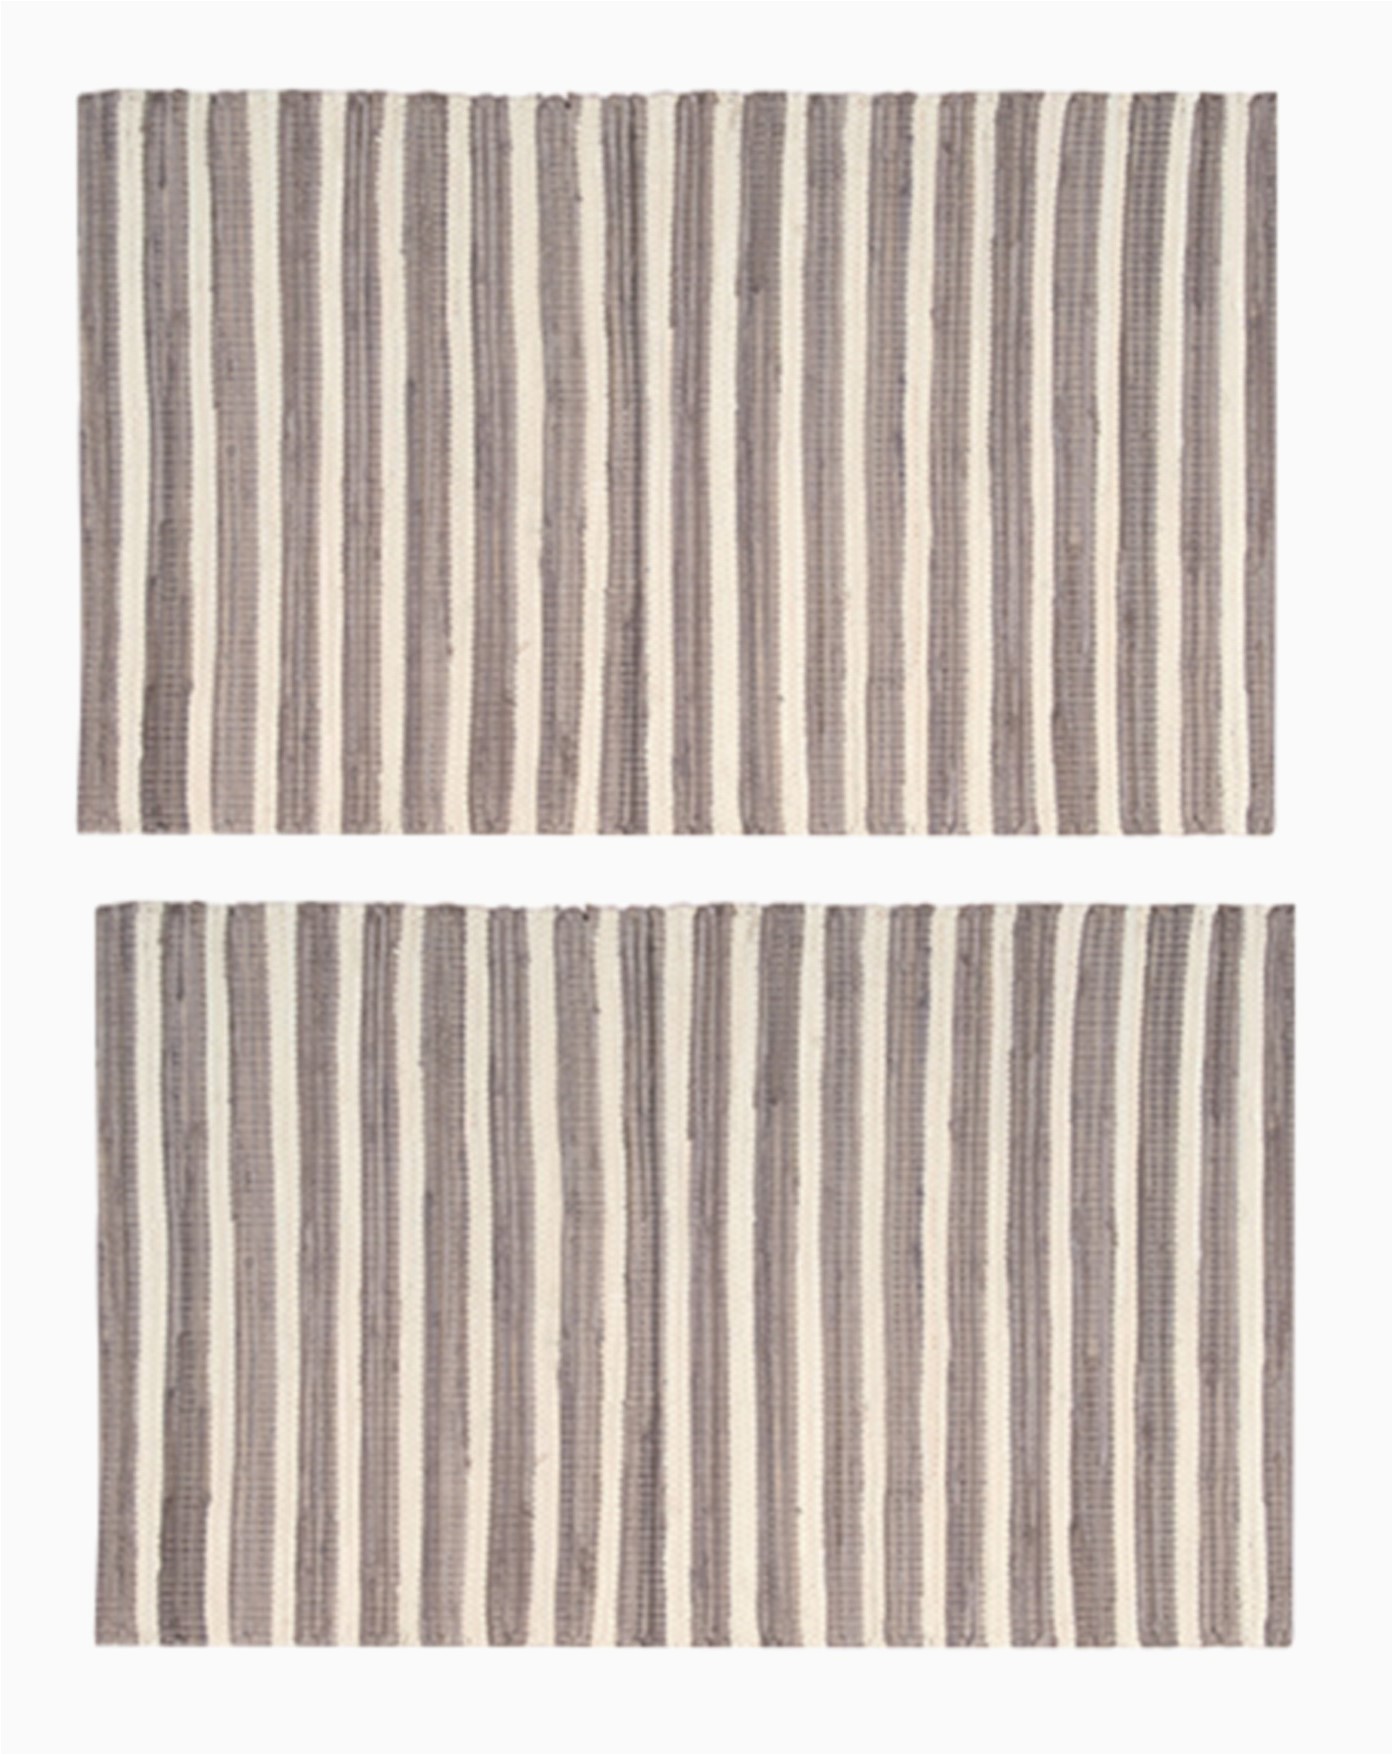 Area Rugs 30 X 48 Details About 2 Pack Nourison Brunswick Stripe Accent Floor area Rugs 24" X 36" or 30" X 48"